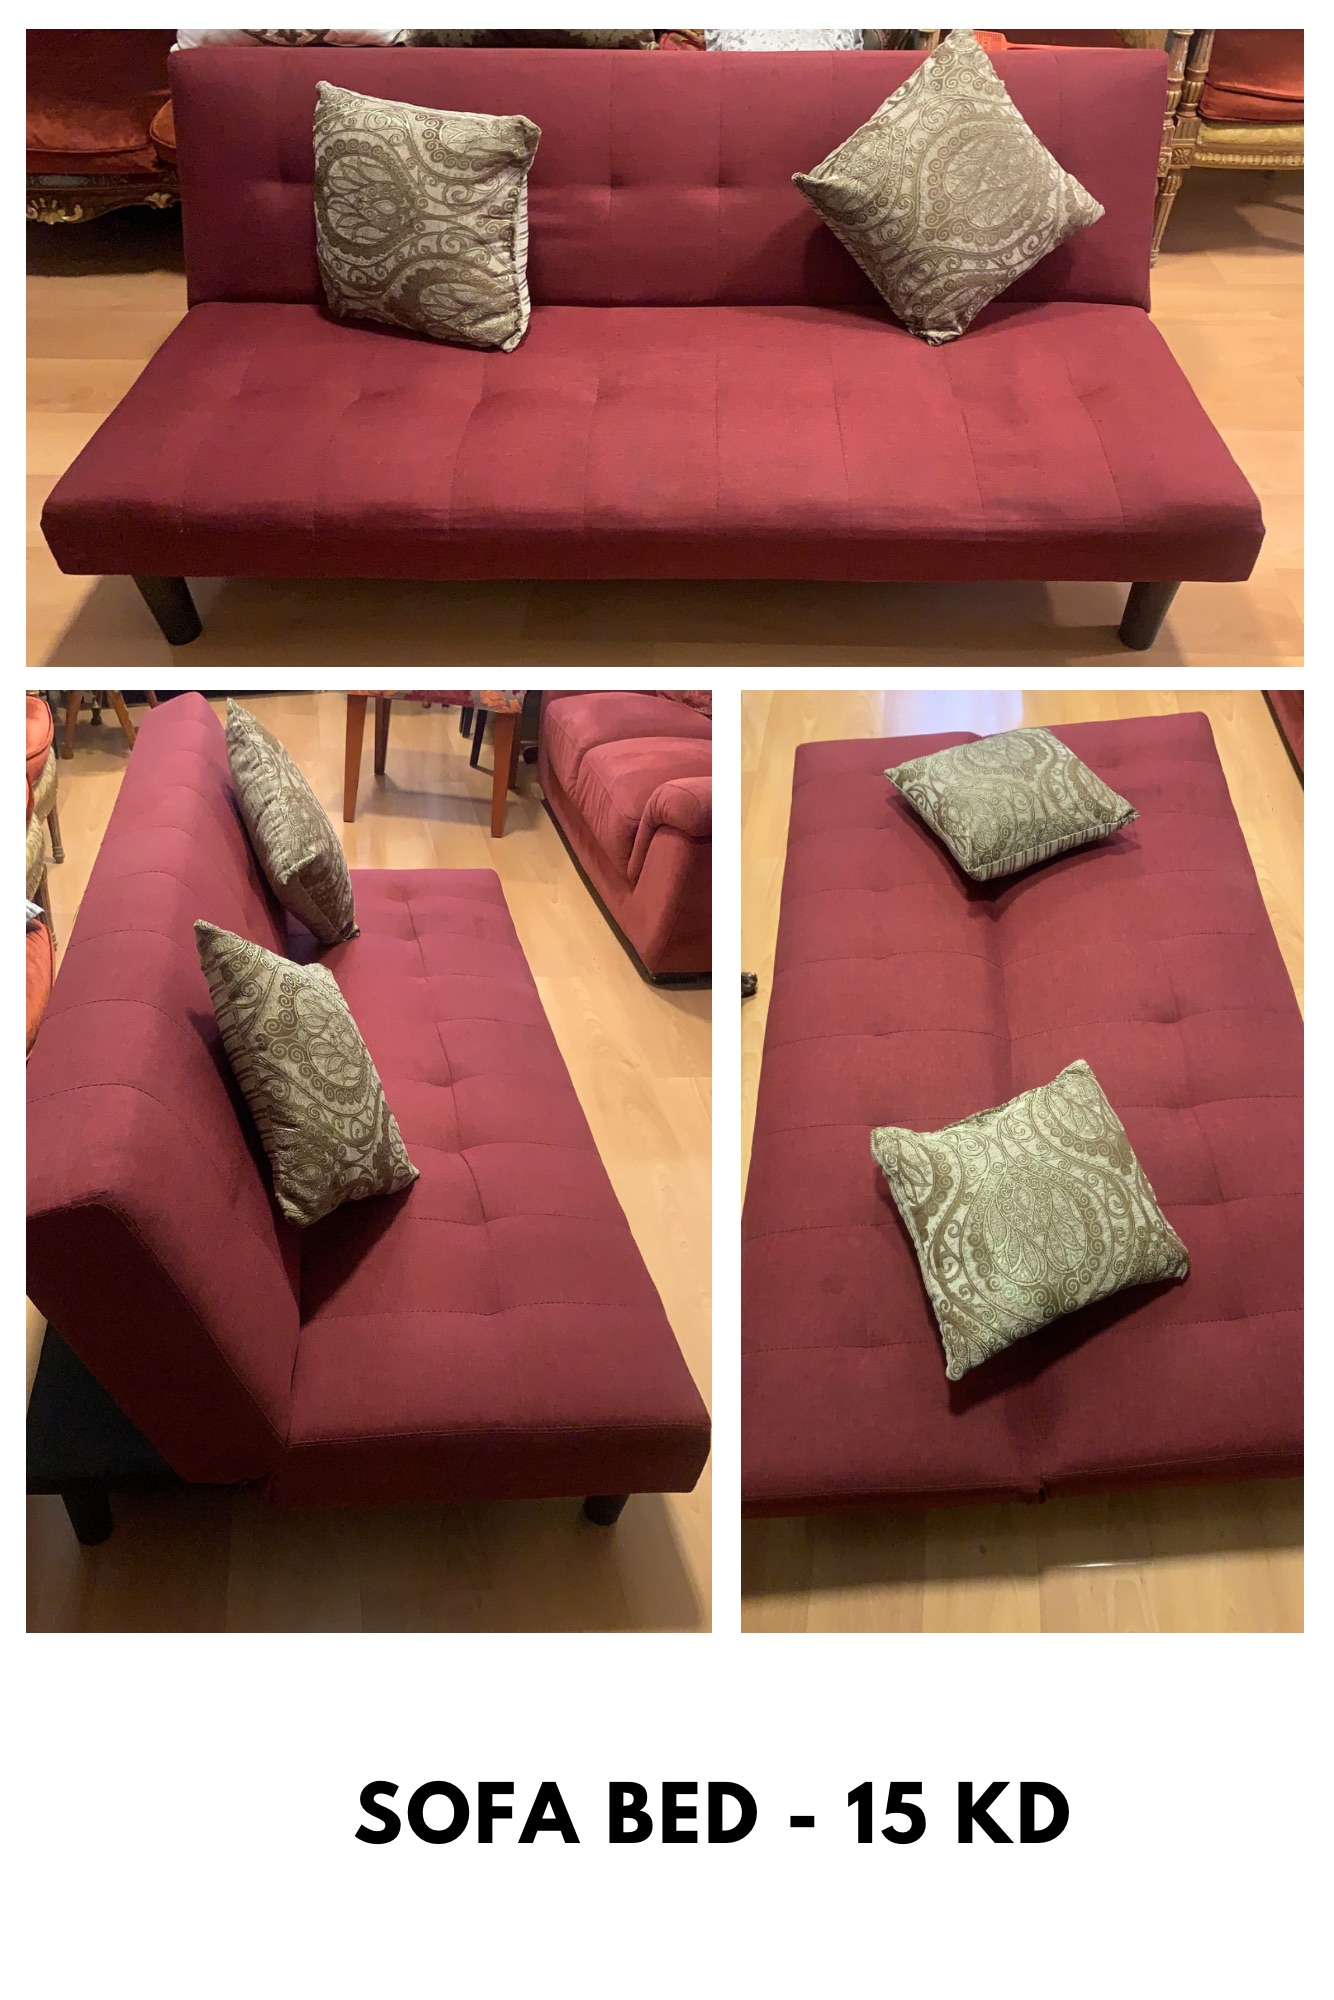 Furniture items for Sale